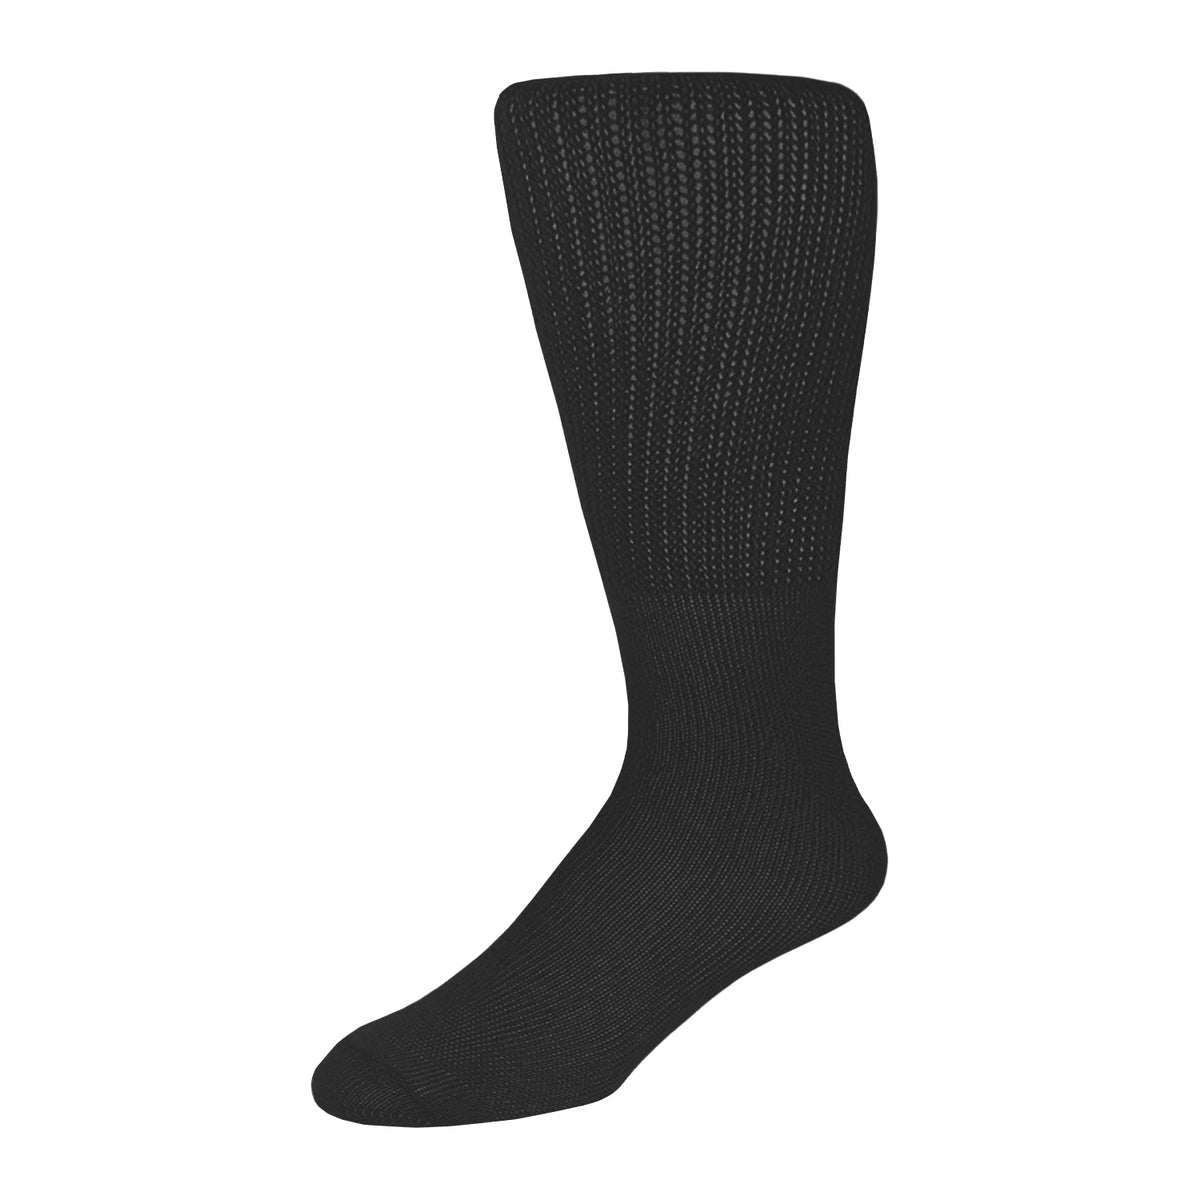 6 pairs of Extra Wide Diabetic Socks, Crew/Over-the-Calf Medical Swoll ...